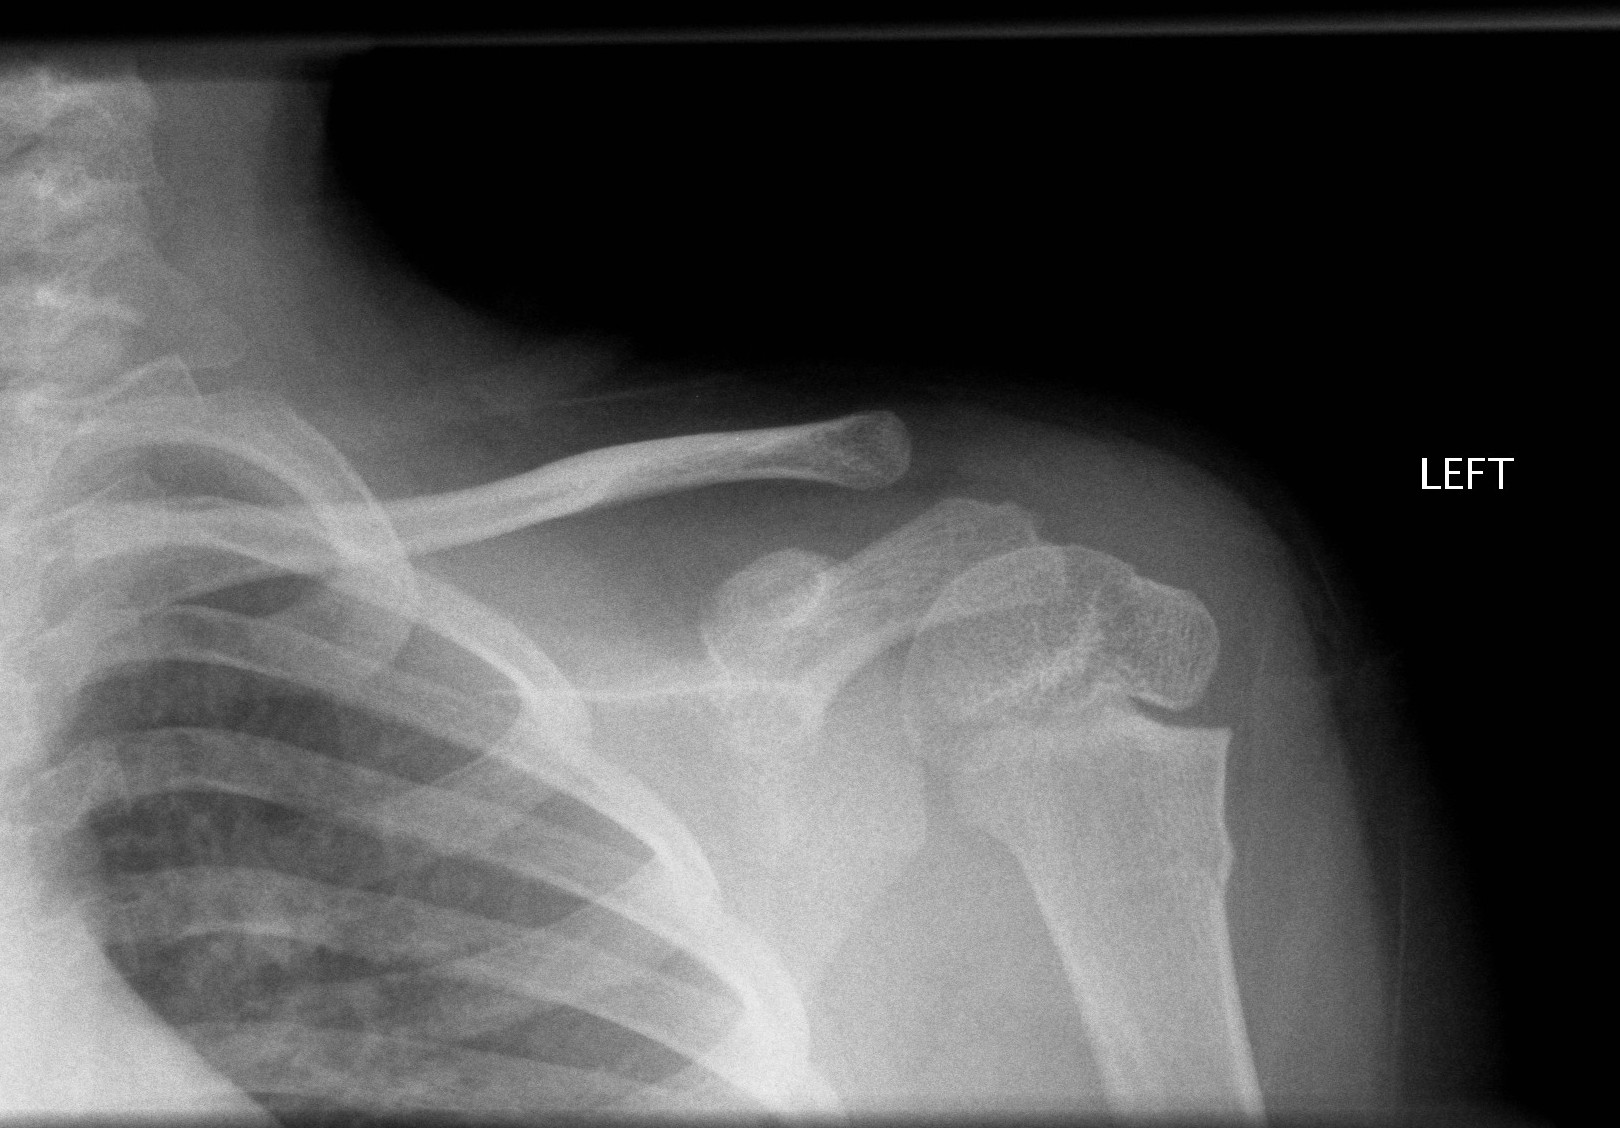 A buckle fracture of proximal humerus